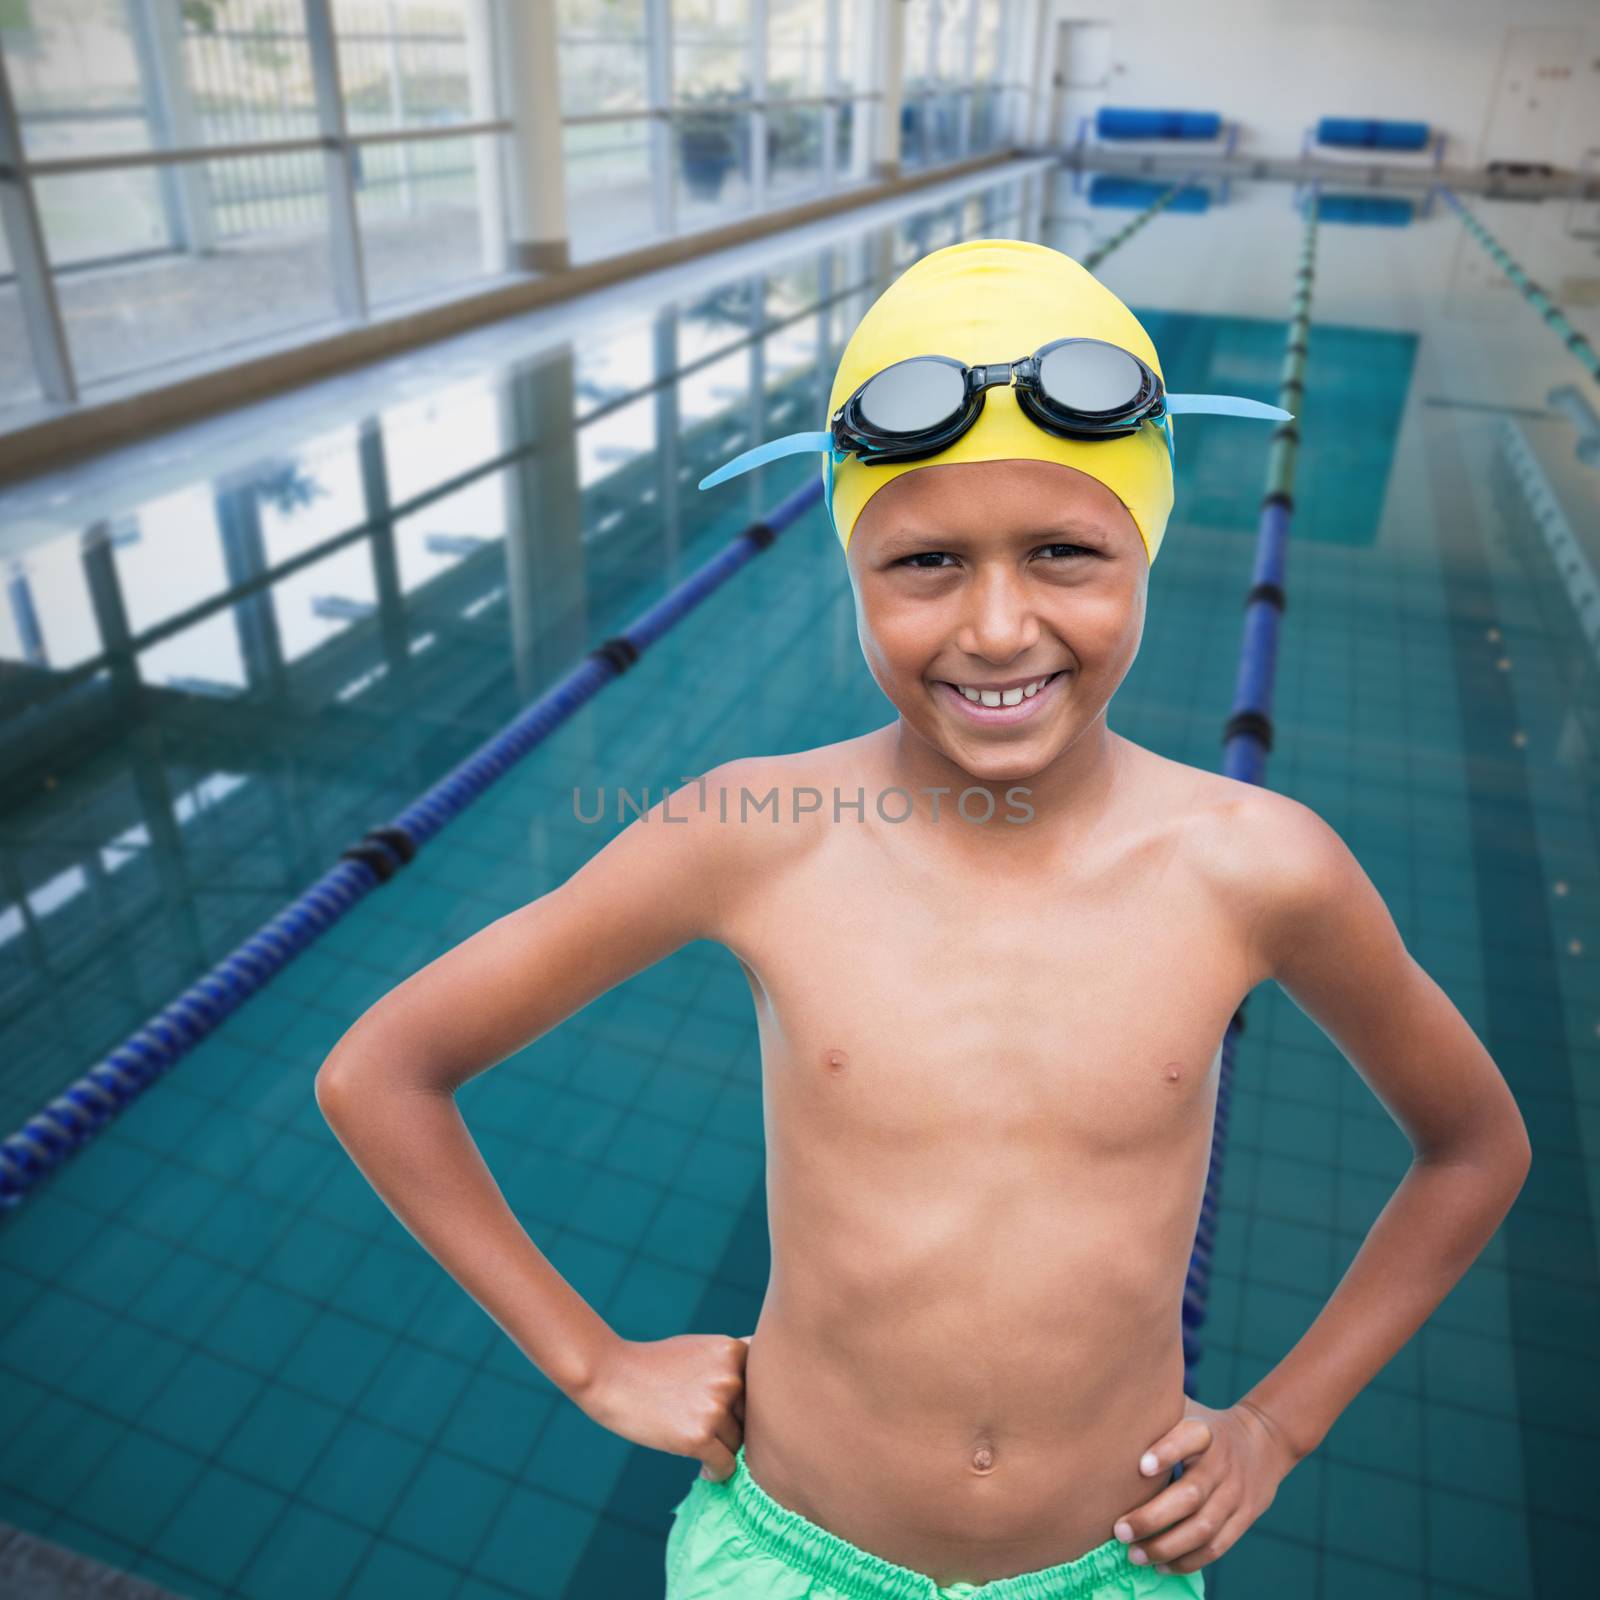 Portrait of cheerful shirtless boy wearing swimming goggles and cap against empty swimming pool with lane markers